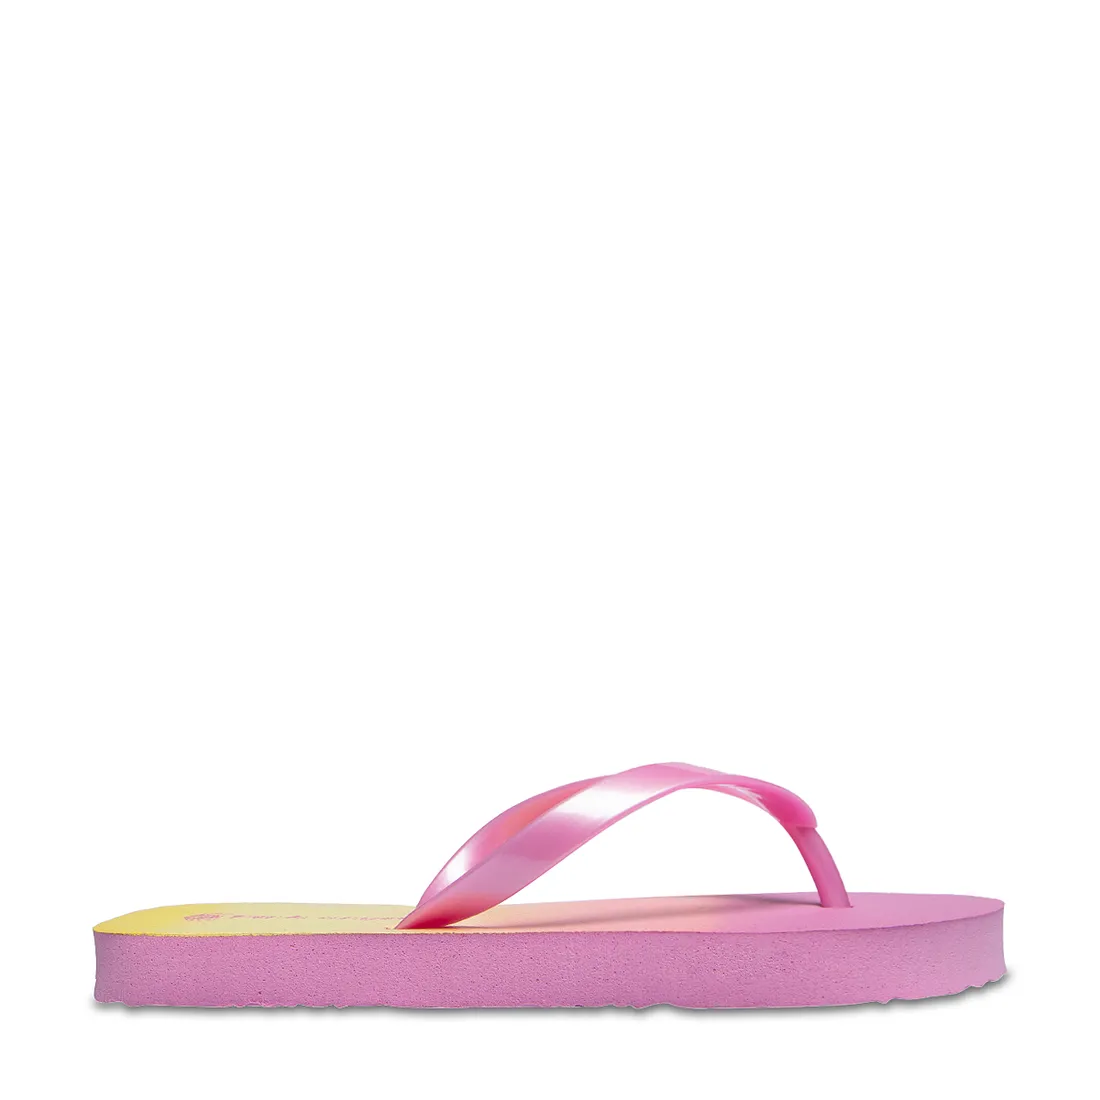 Ombre flip flop pink & yellow - GIRLS 7-15 YEARS Shoes | Ackermans